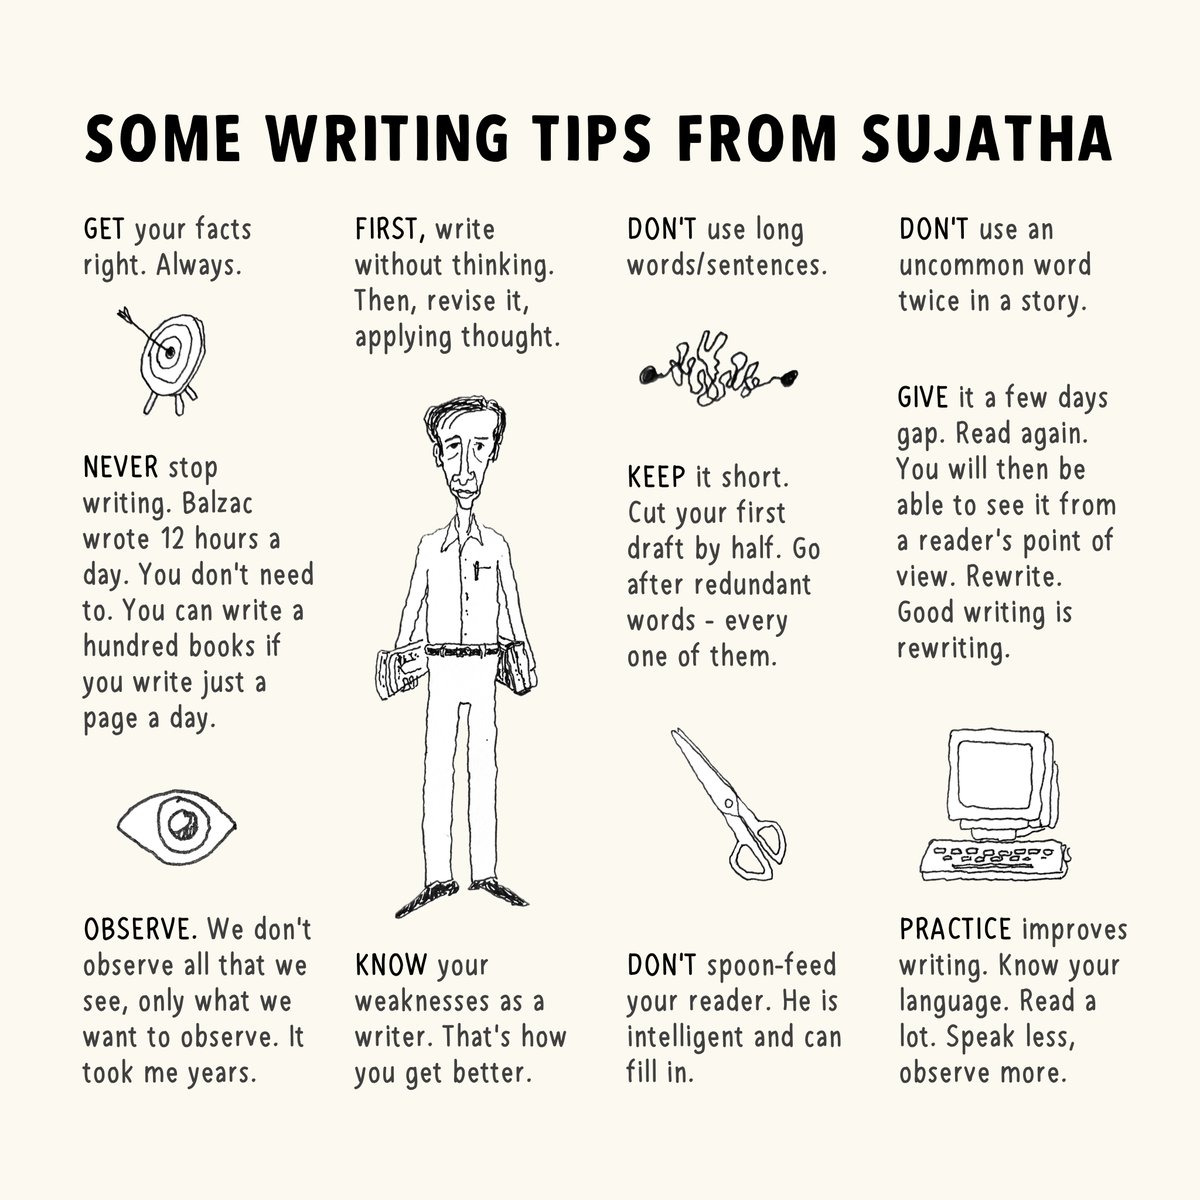 Some writing tips